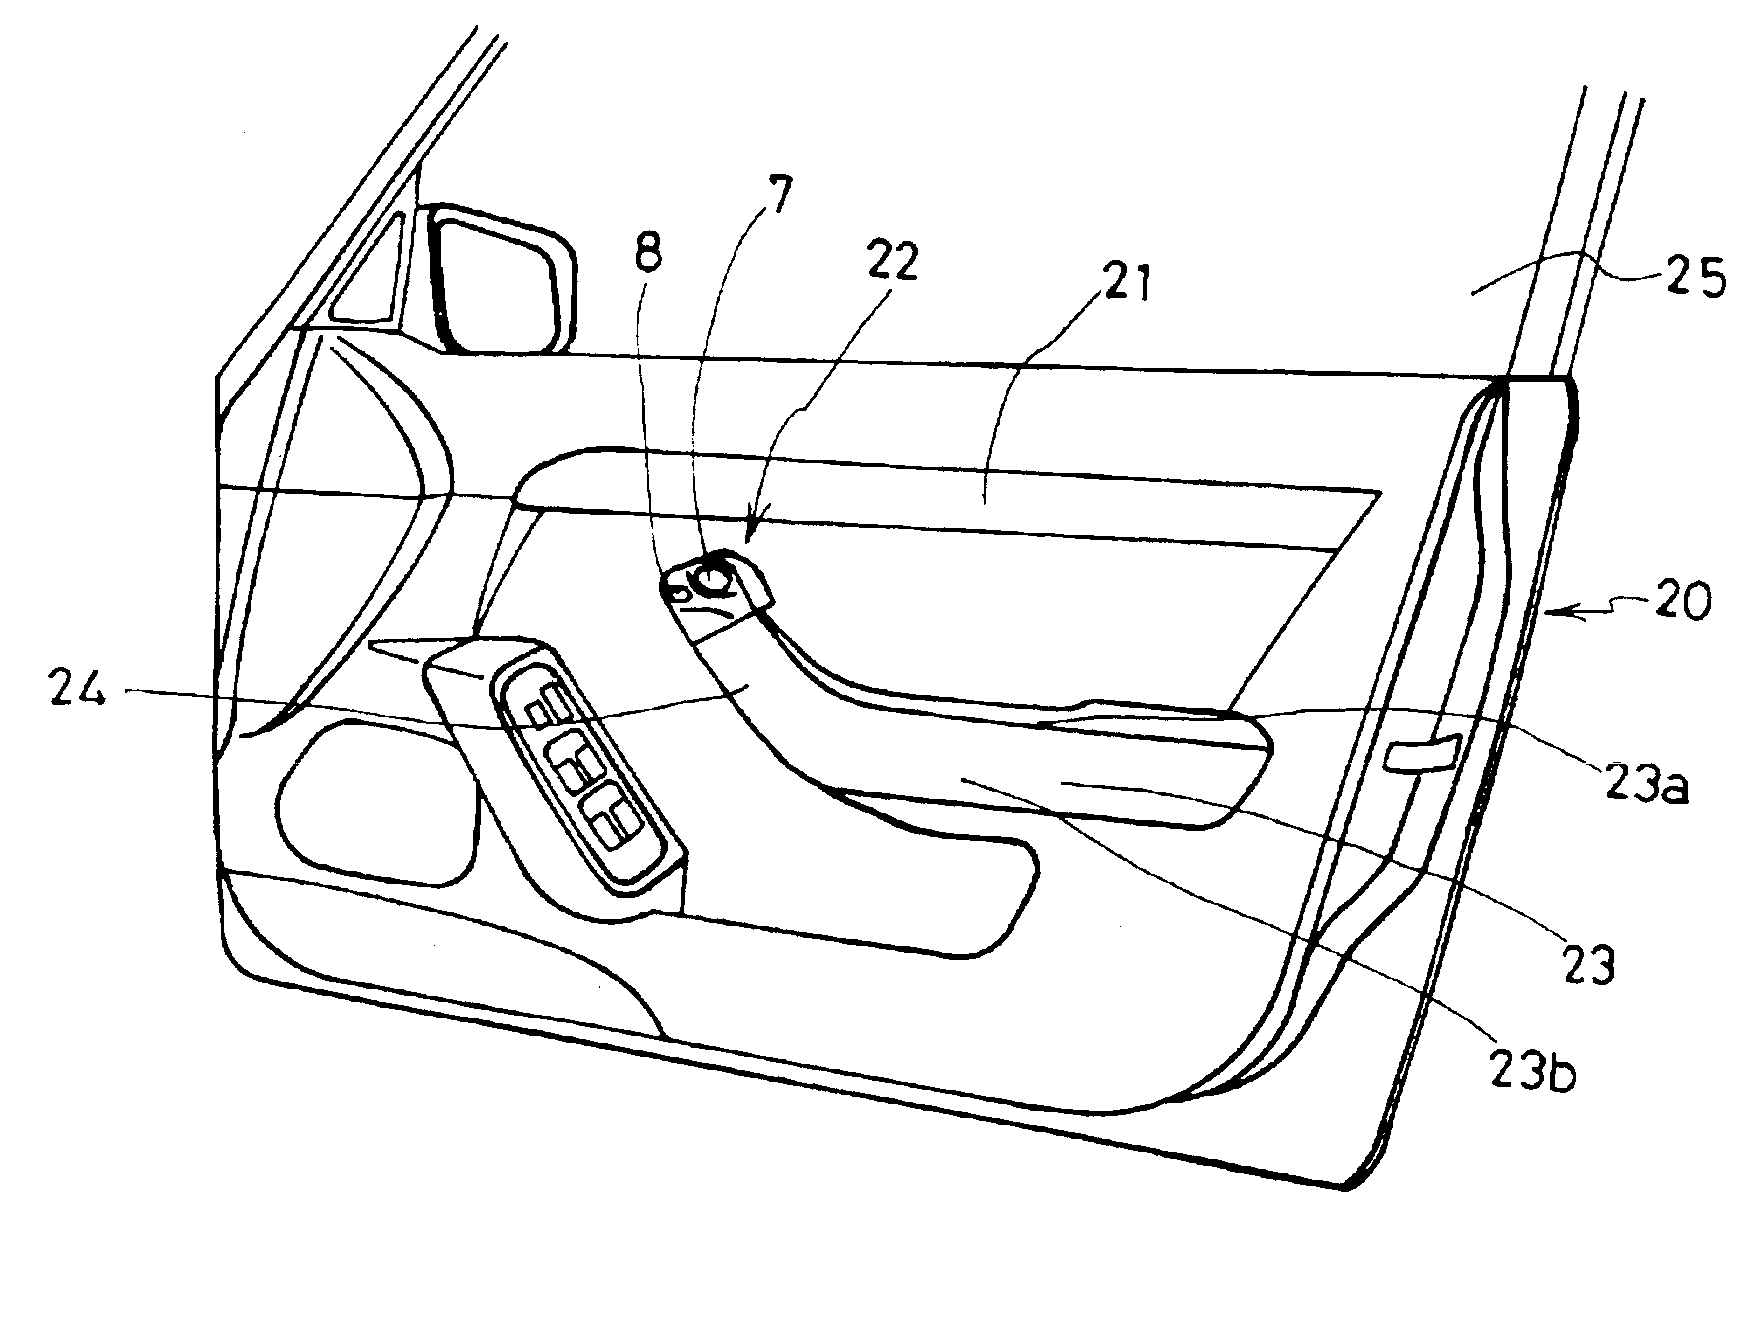 Door opening/closing control apparatus for a vehicle